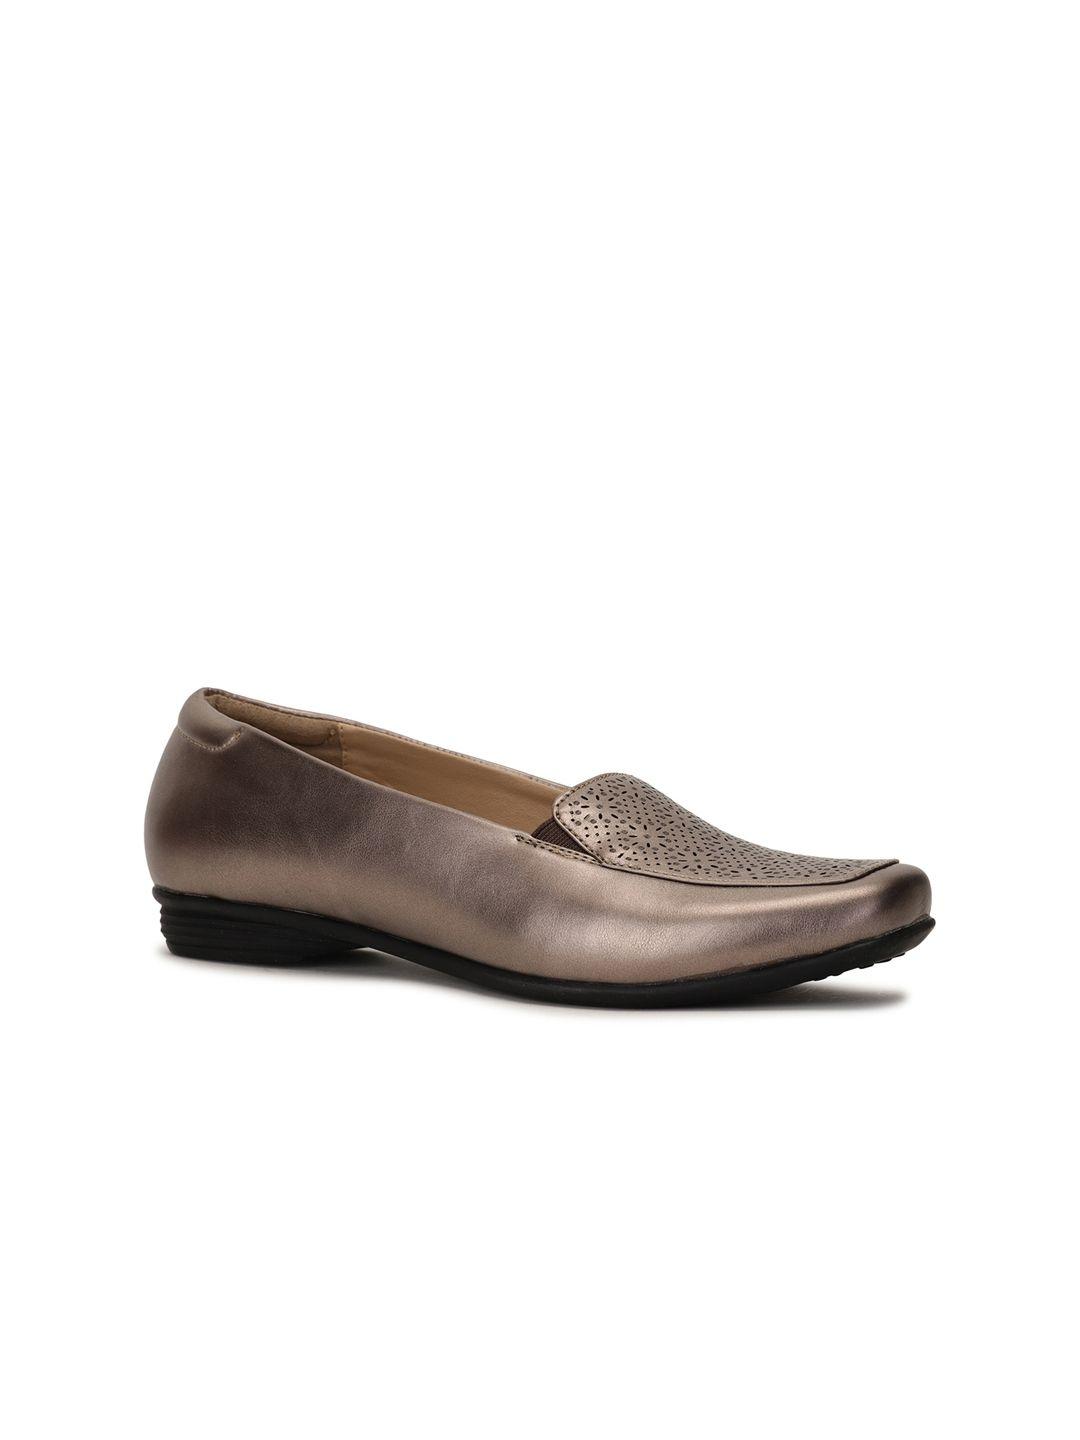 bata-women-gunmetal-toned-textured-leather-party-ballerinas-with-laser-cuts-flats